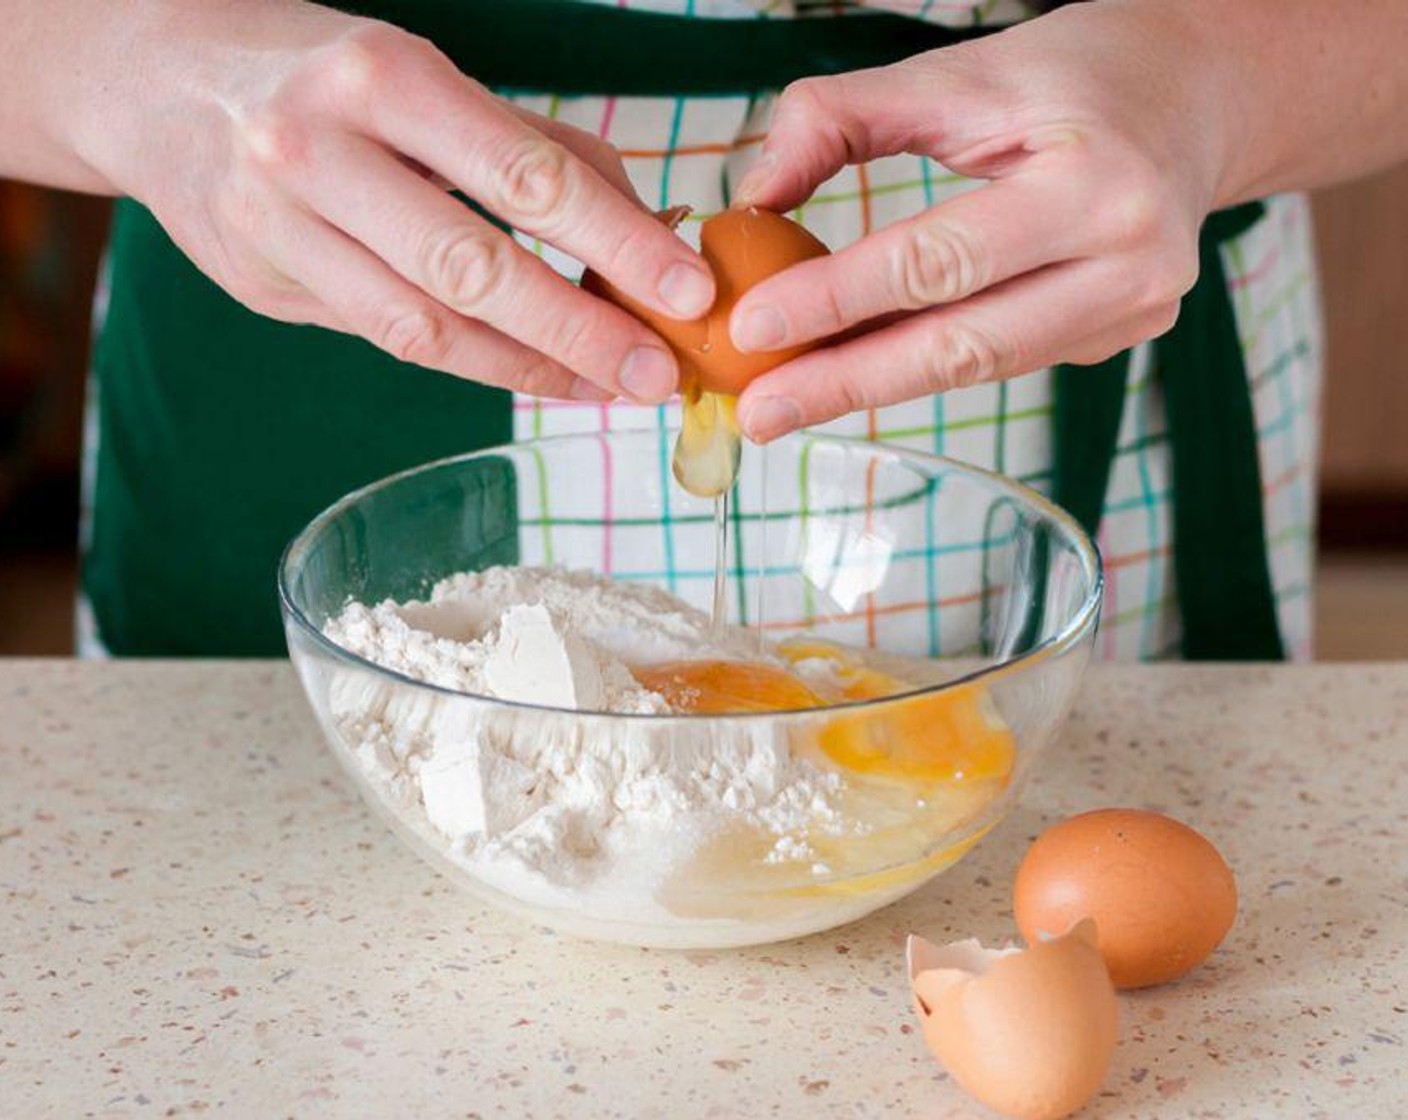 step 5 You can now prepare the batter. Whisk together the Farmhouse Eggs® Large Brown Eggs (3), Mayonnaise (1/3 cup), Granulated Sugar (1/2 Tbsp), and Greek Yogurt (1/3 cup) in a large bowl until well combined.